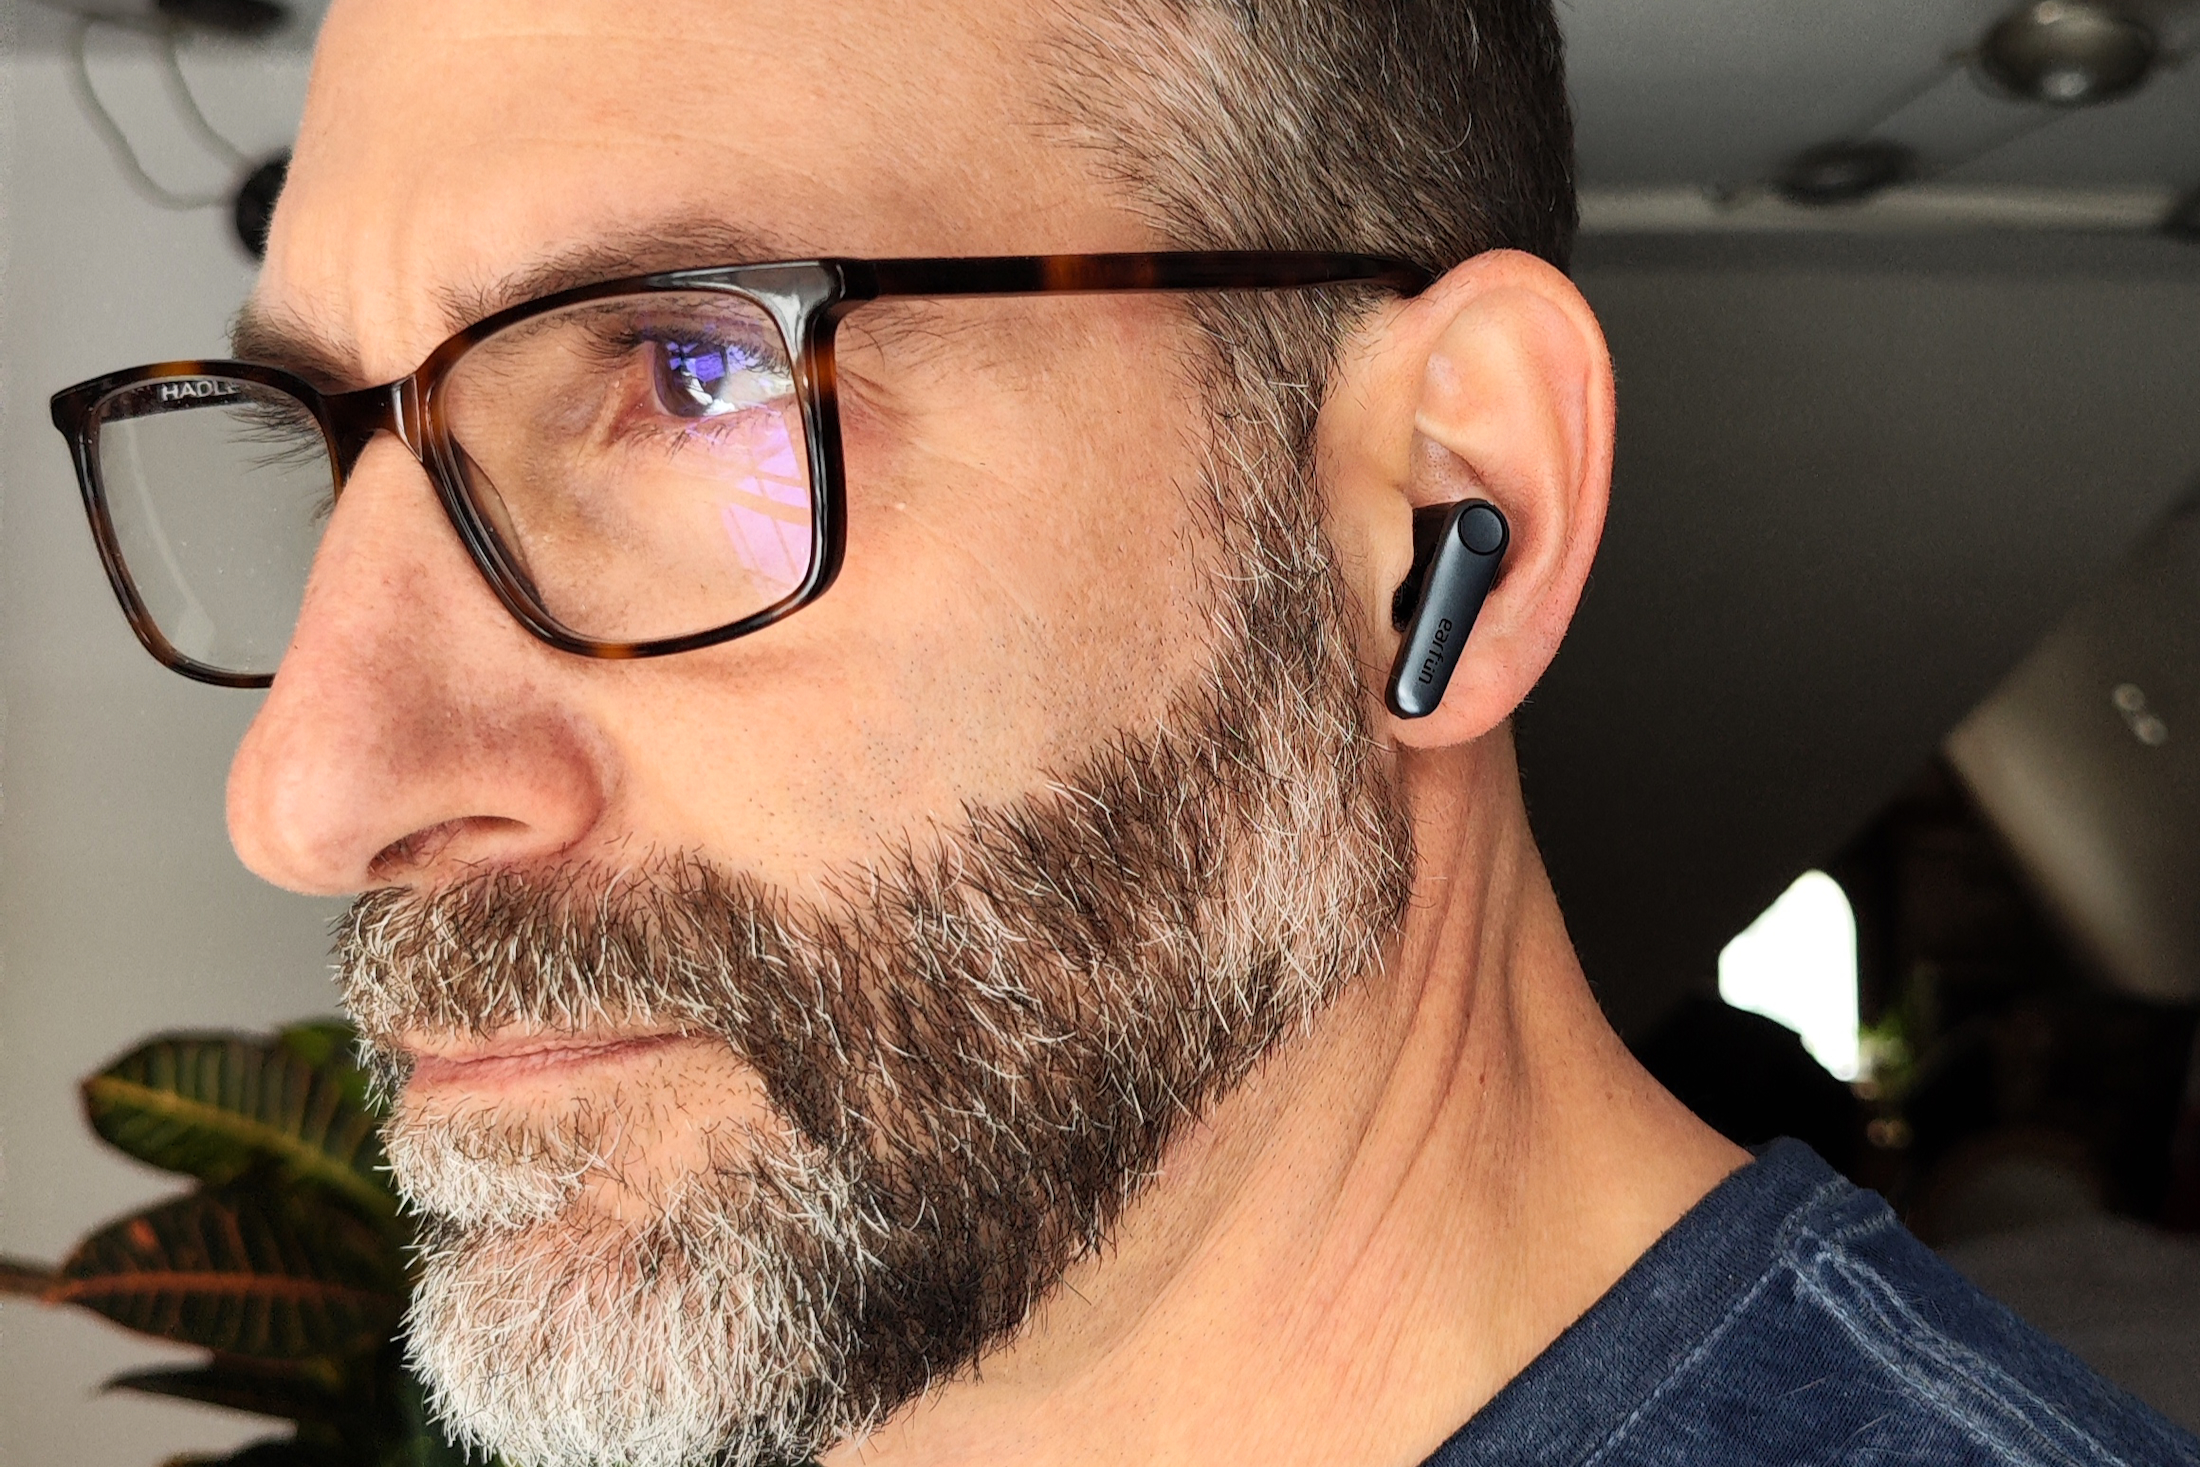 EarFun Air Pro 3 in the test - active noise cancelling at a reasonable price